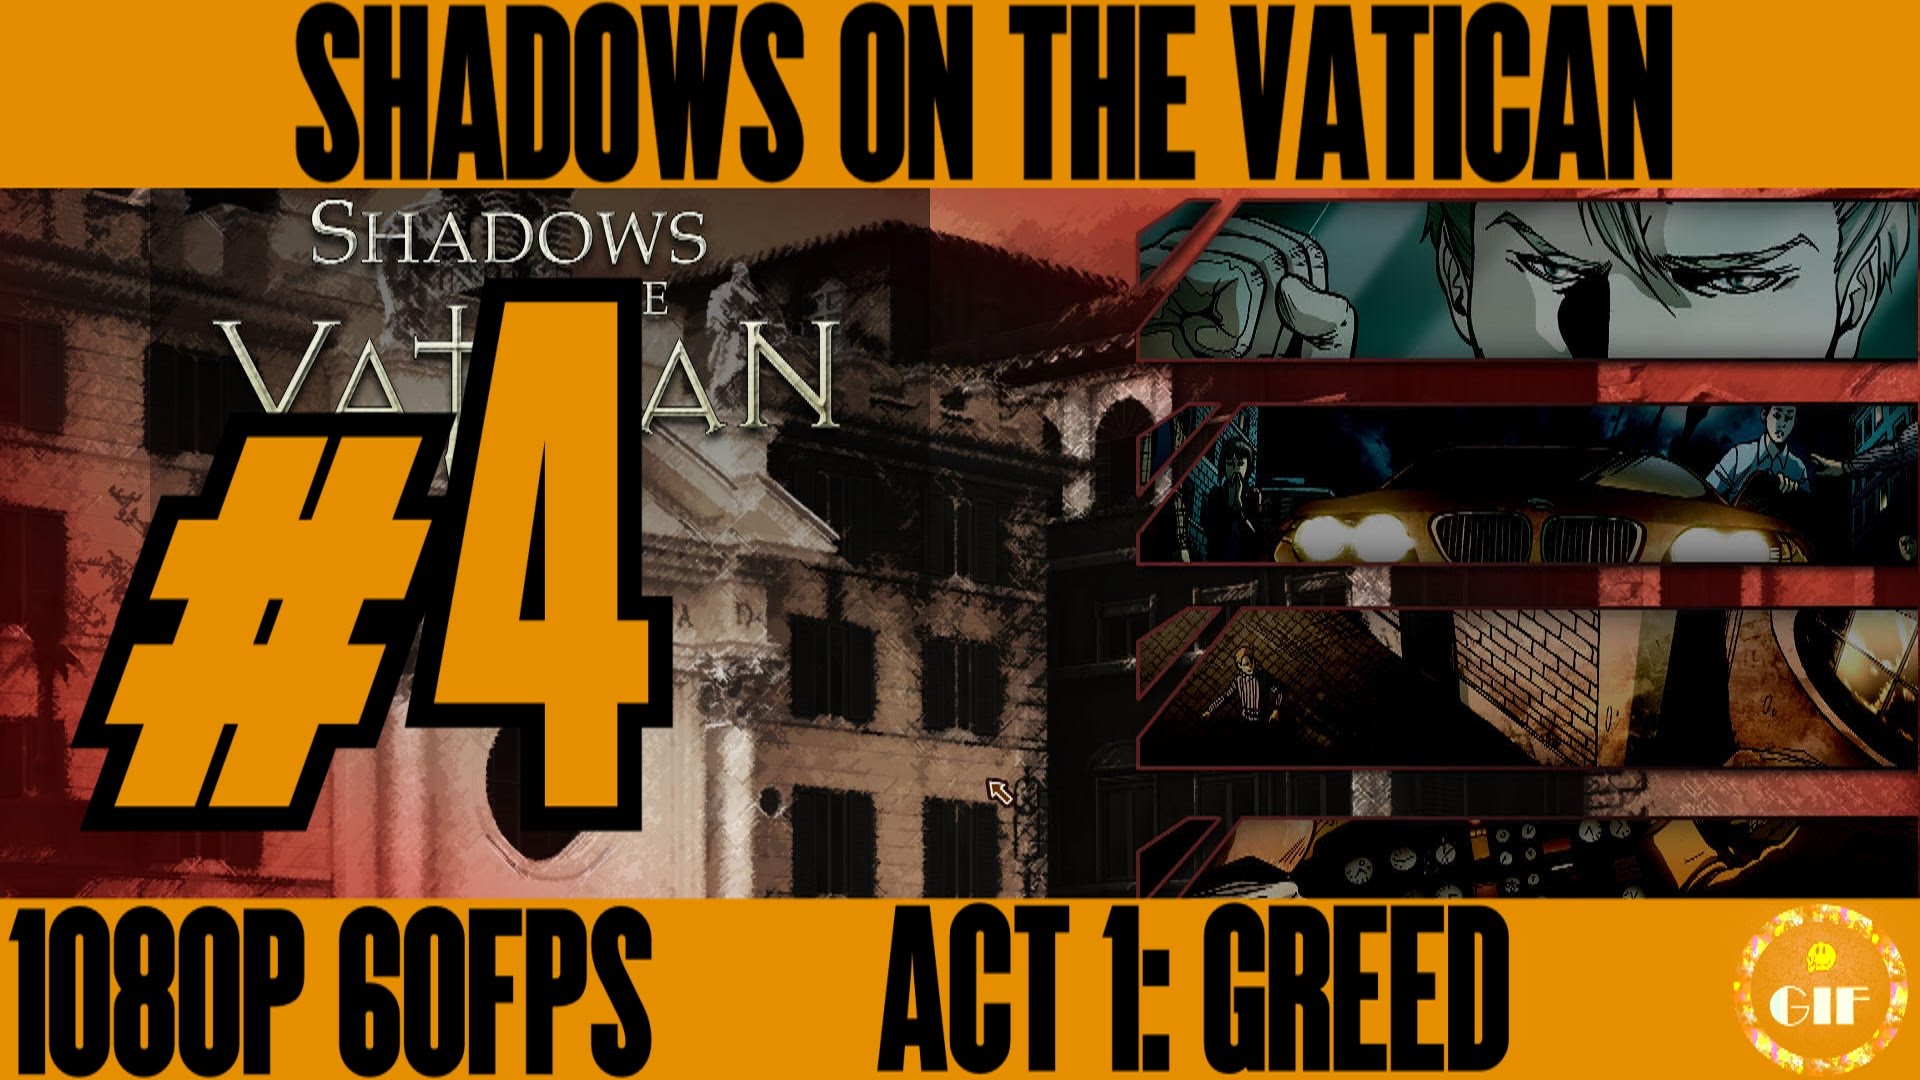 Shadows On The Vatican - Act I: Greed HD wallpapers, Desktop wallpaper - most viewed